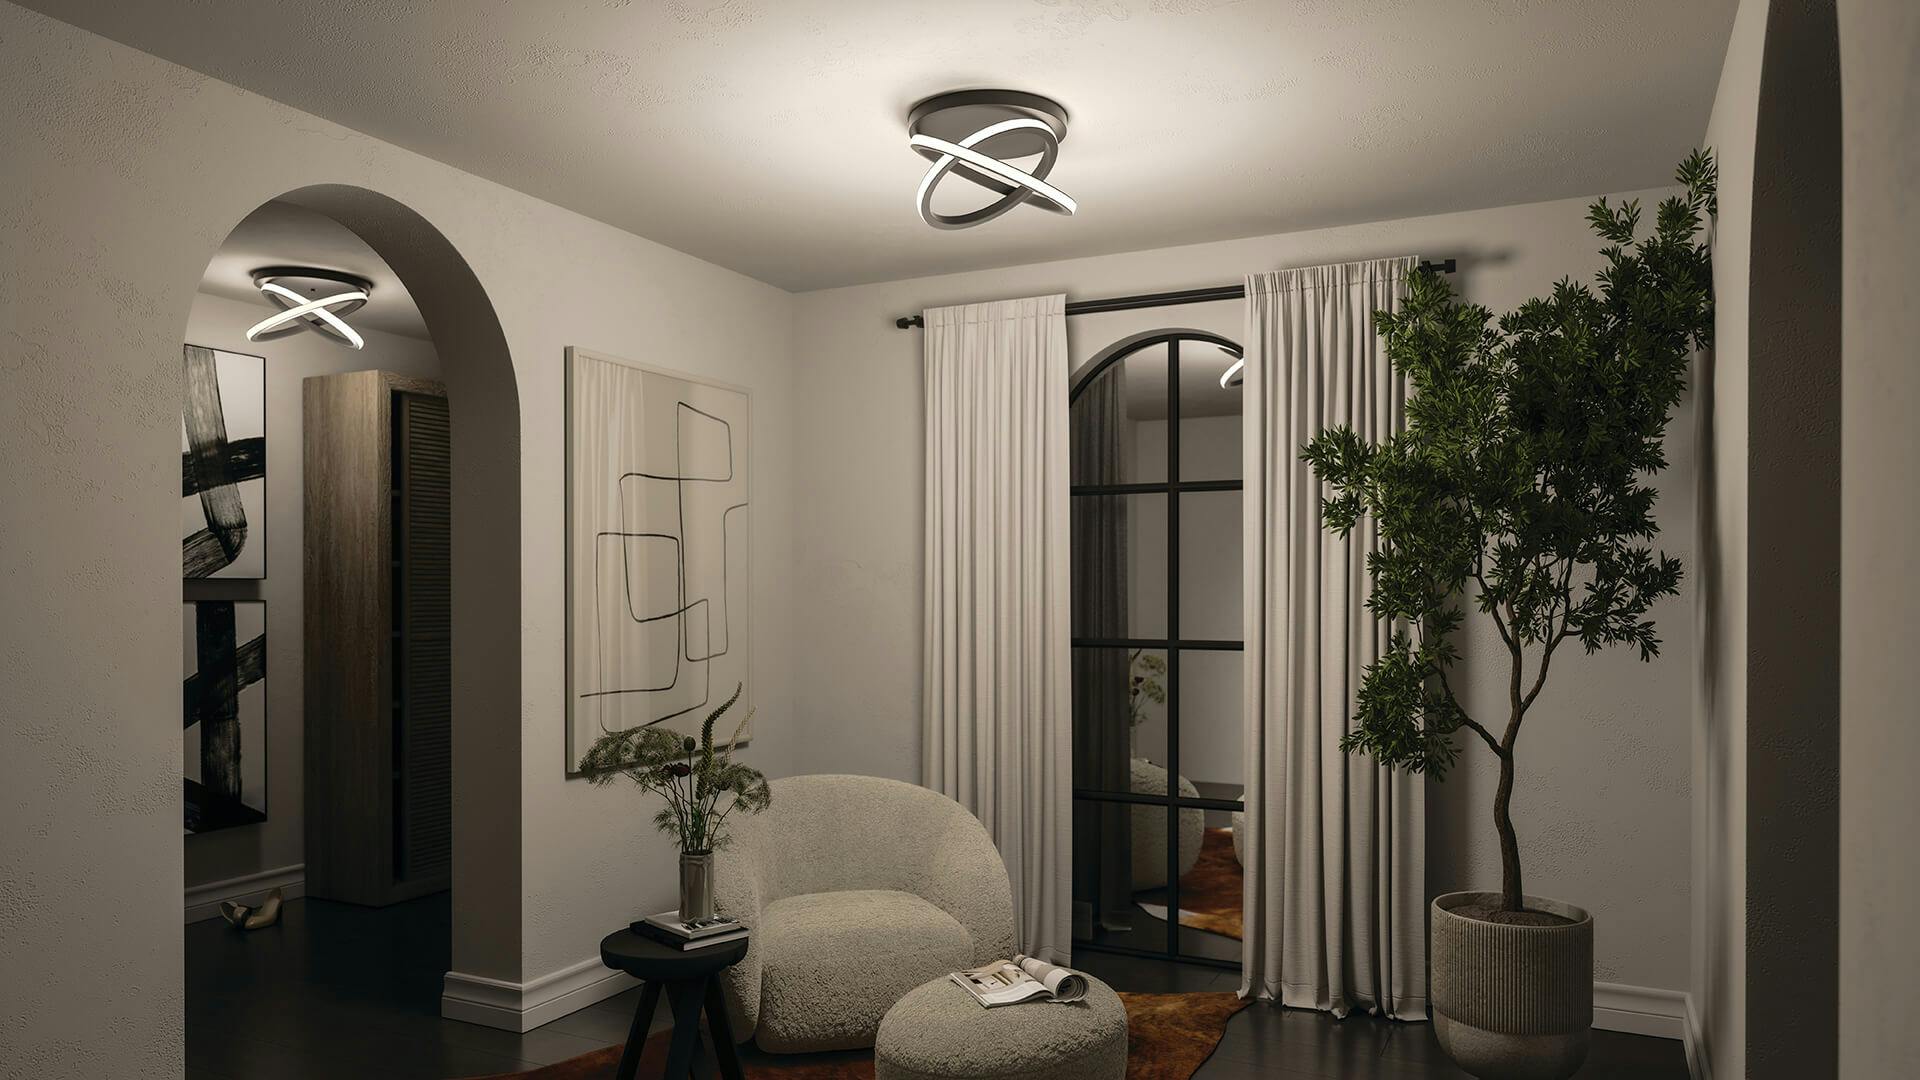 Small living room corner at night with accent chair and ottoman featuring a Caputo ceiling light